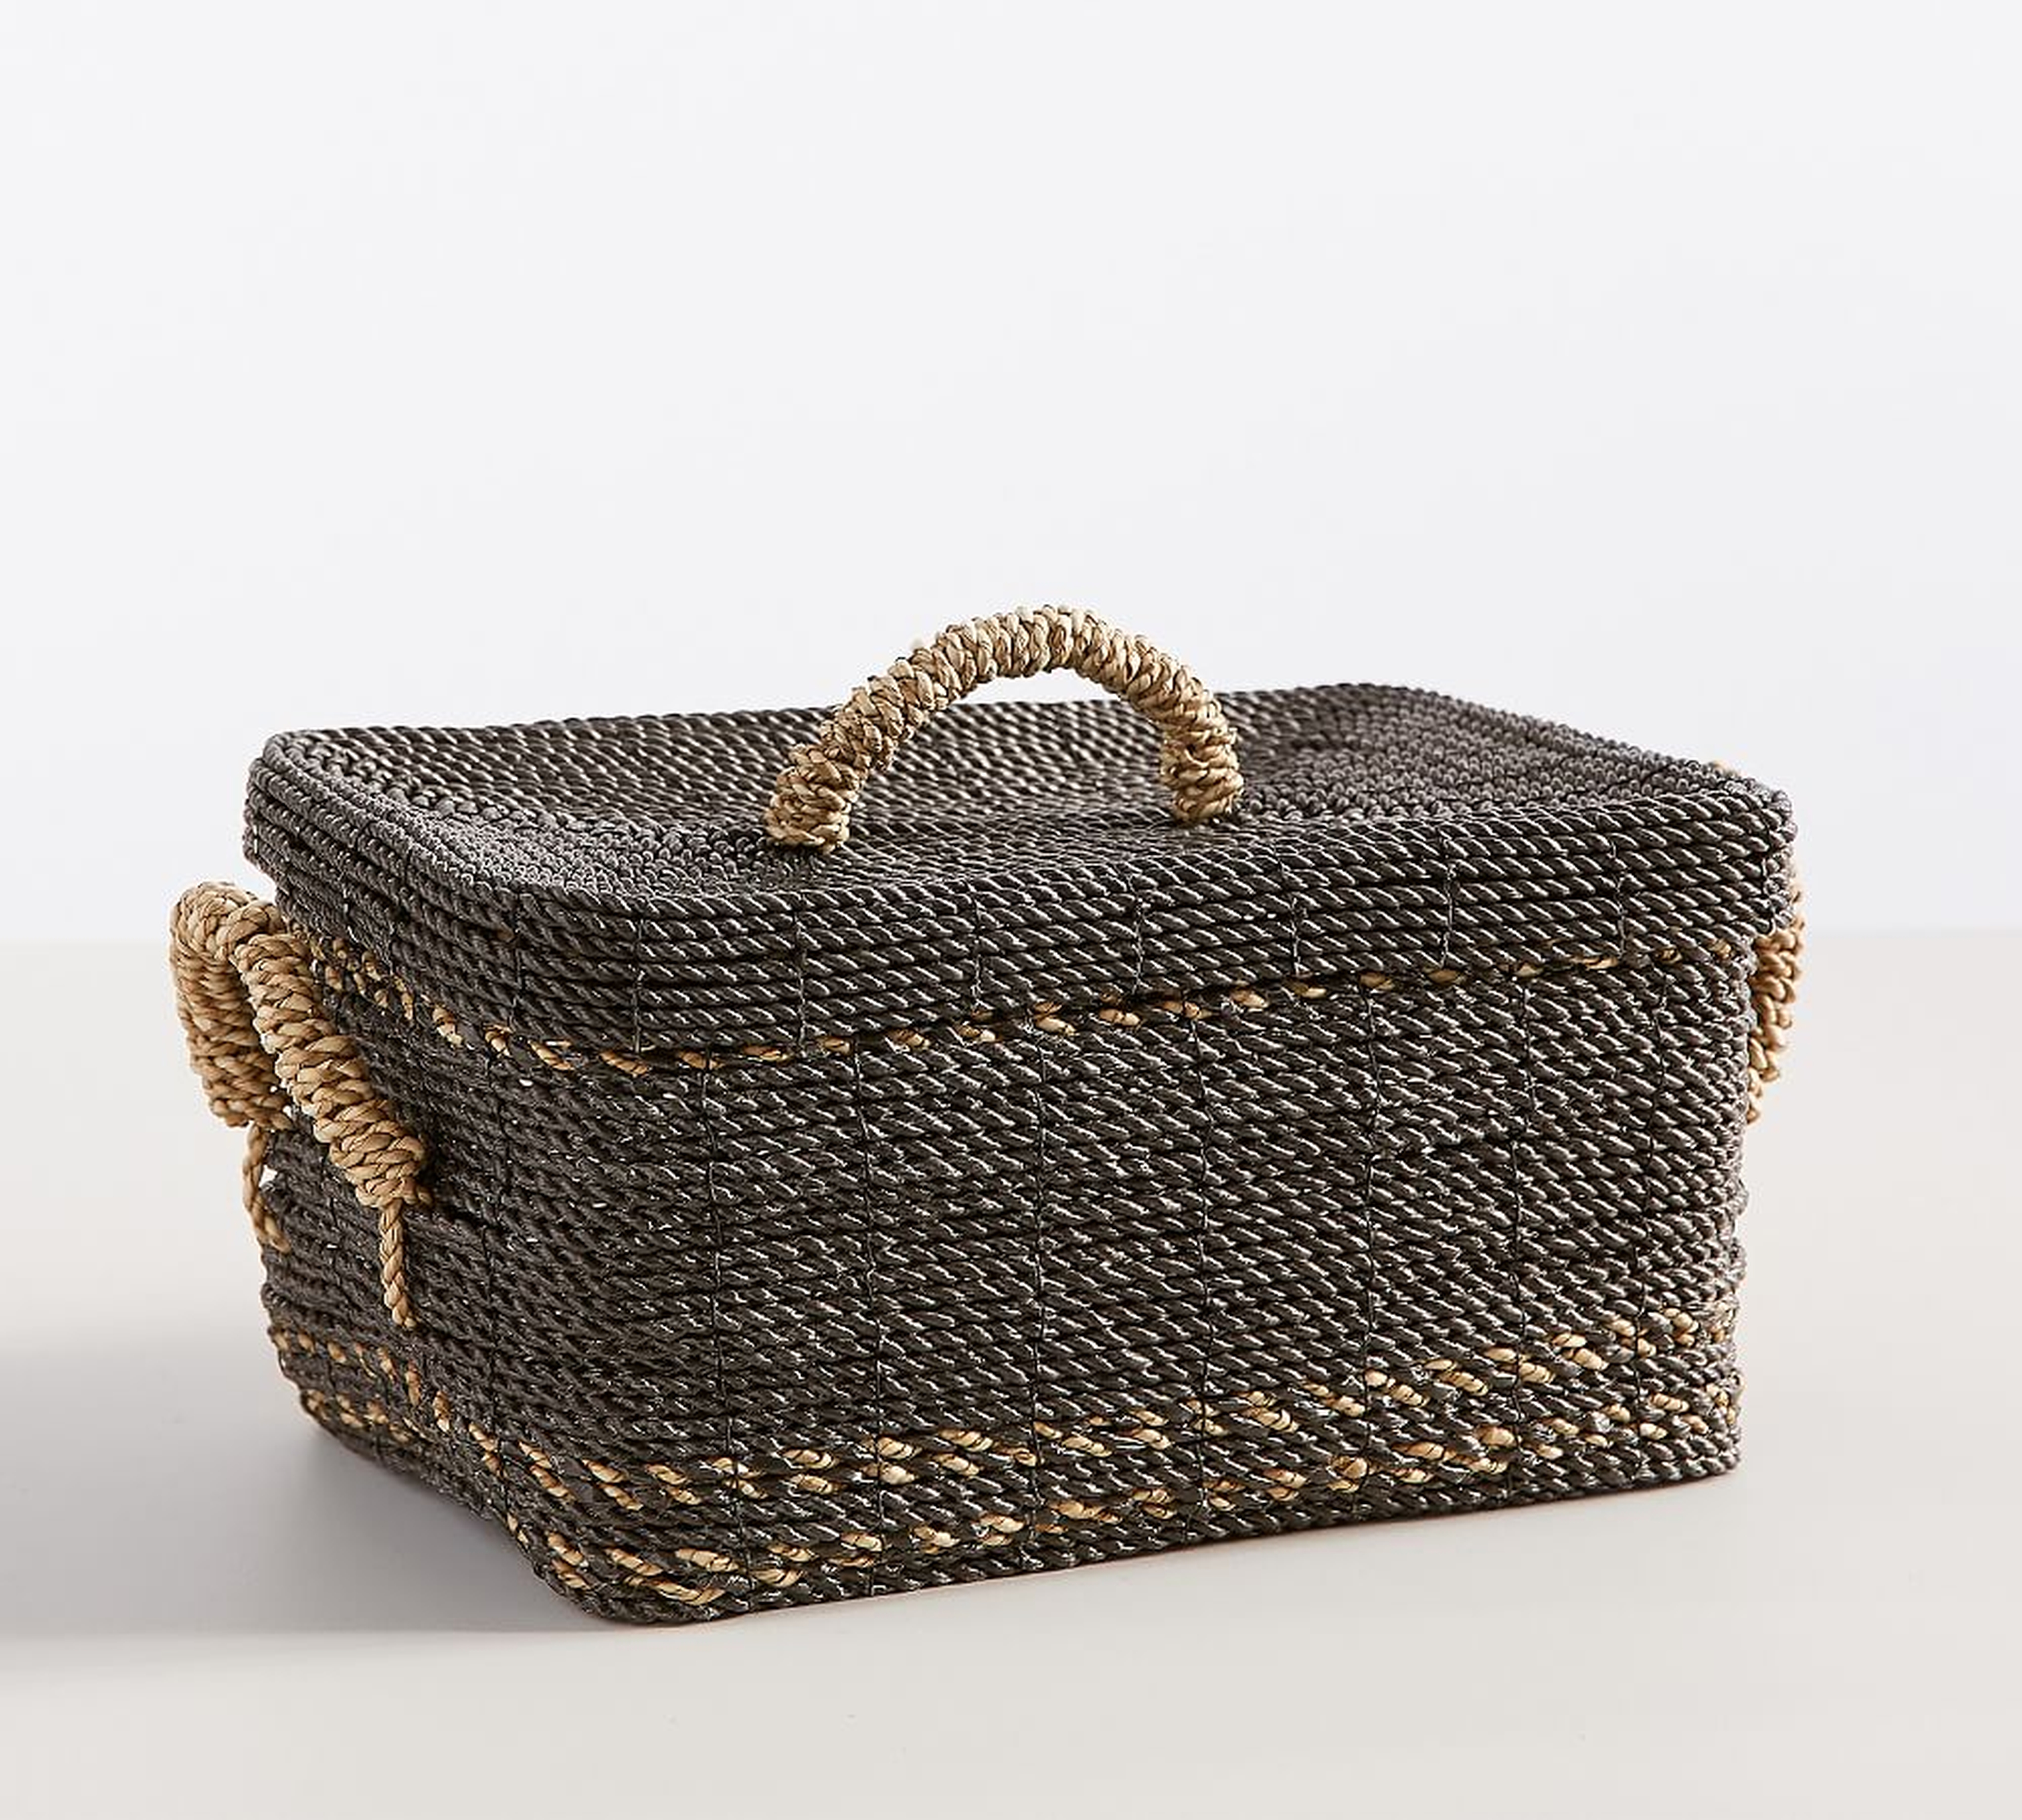 Asher Lidded Seagrass Basket, Charcoal/natural - Pottery Barn